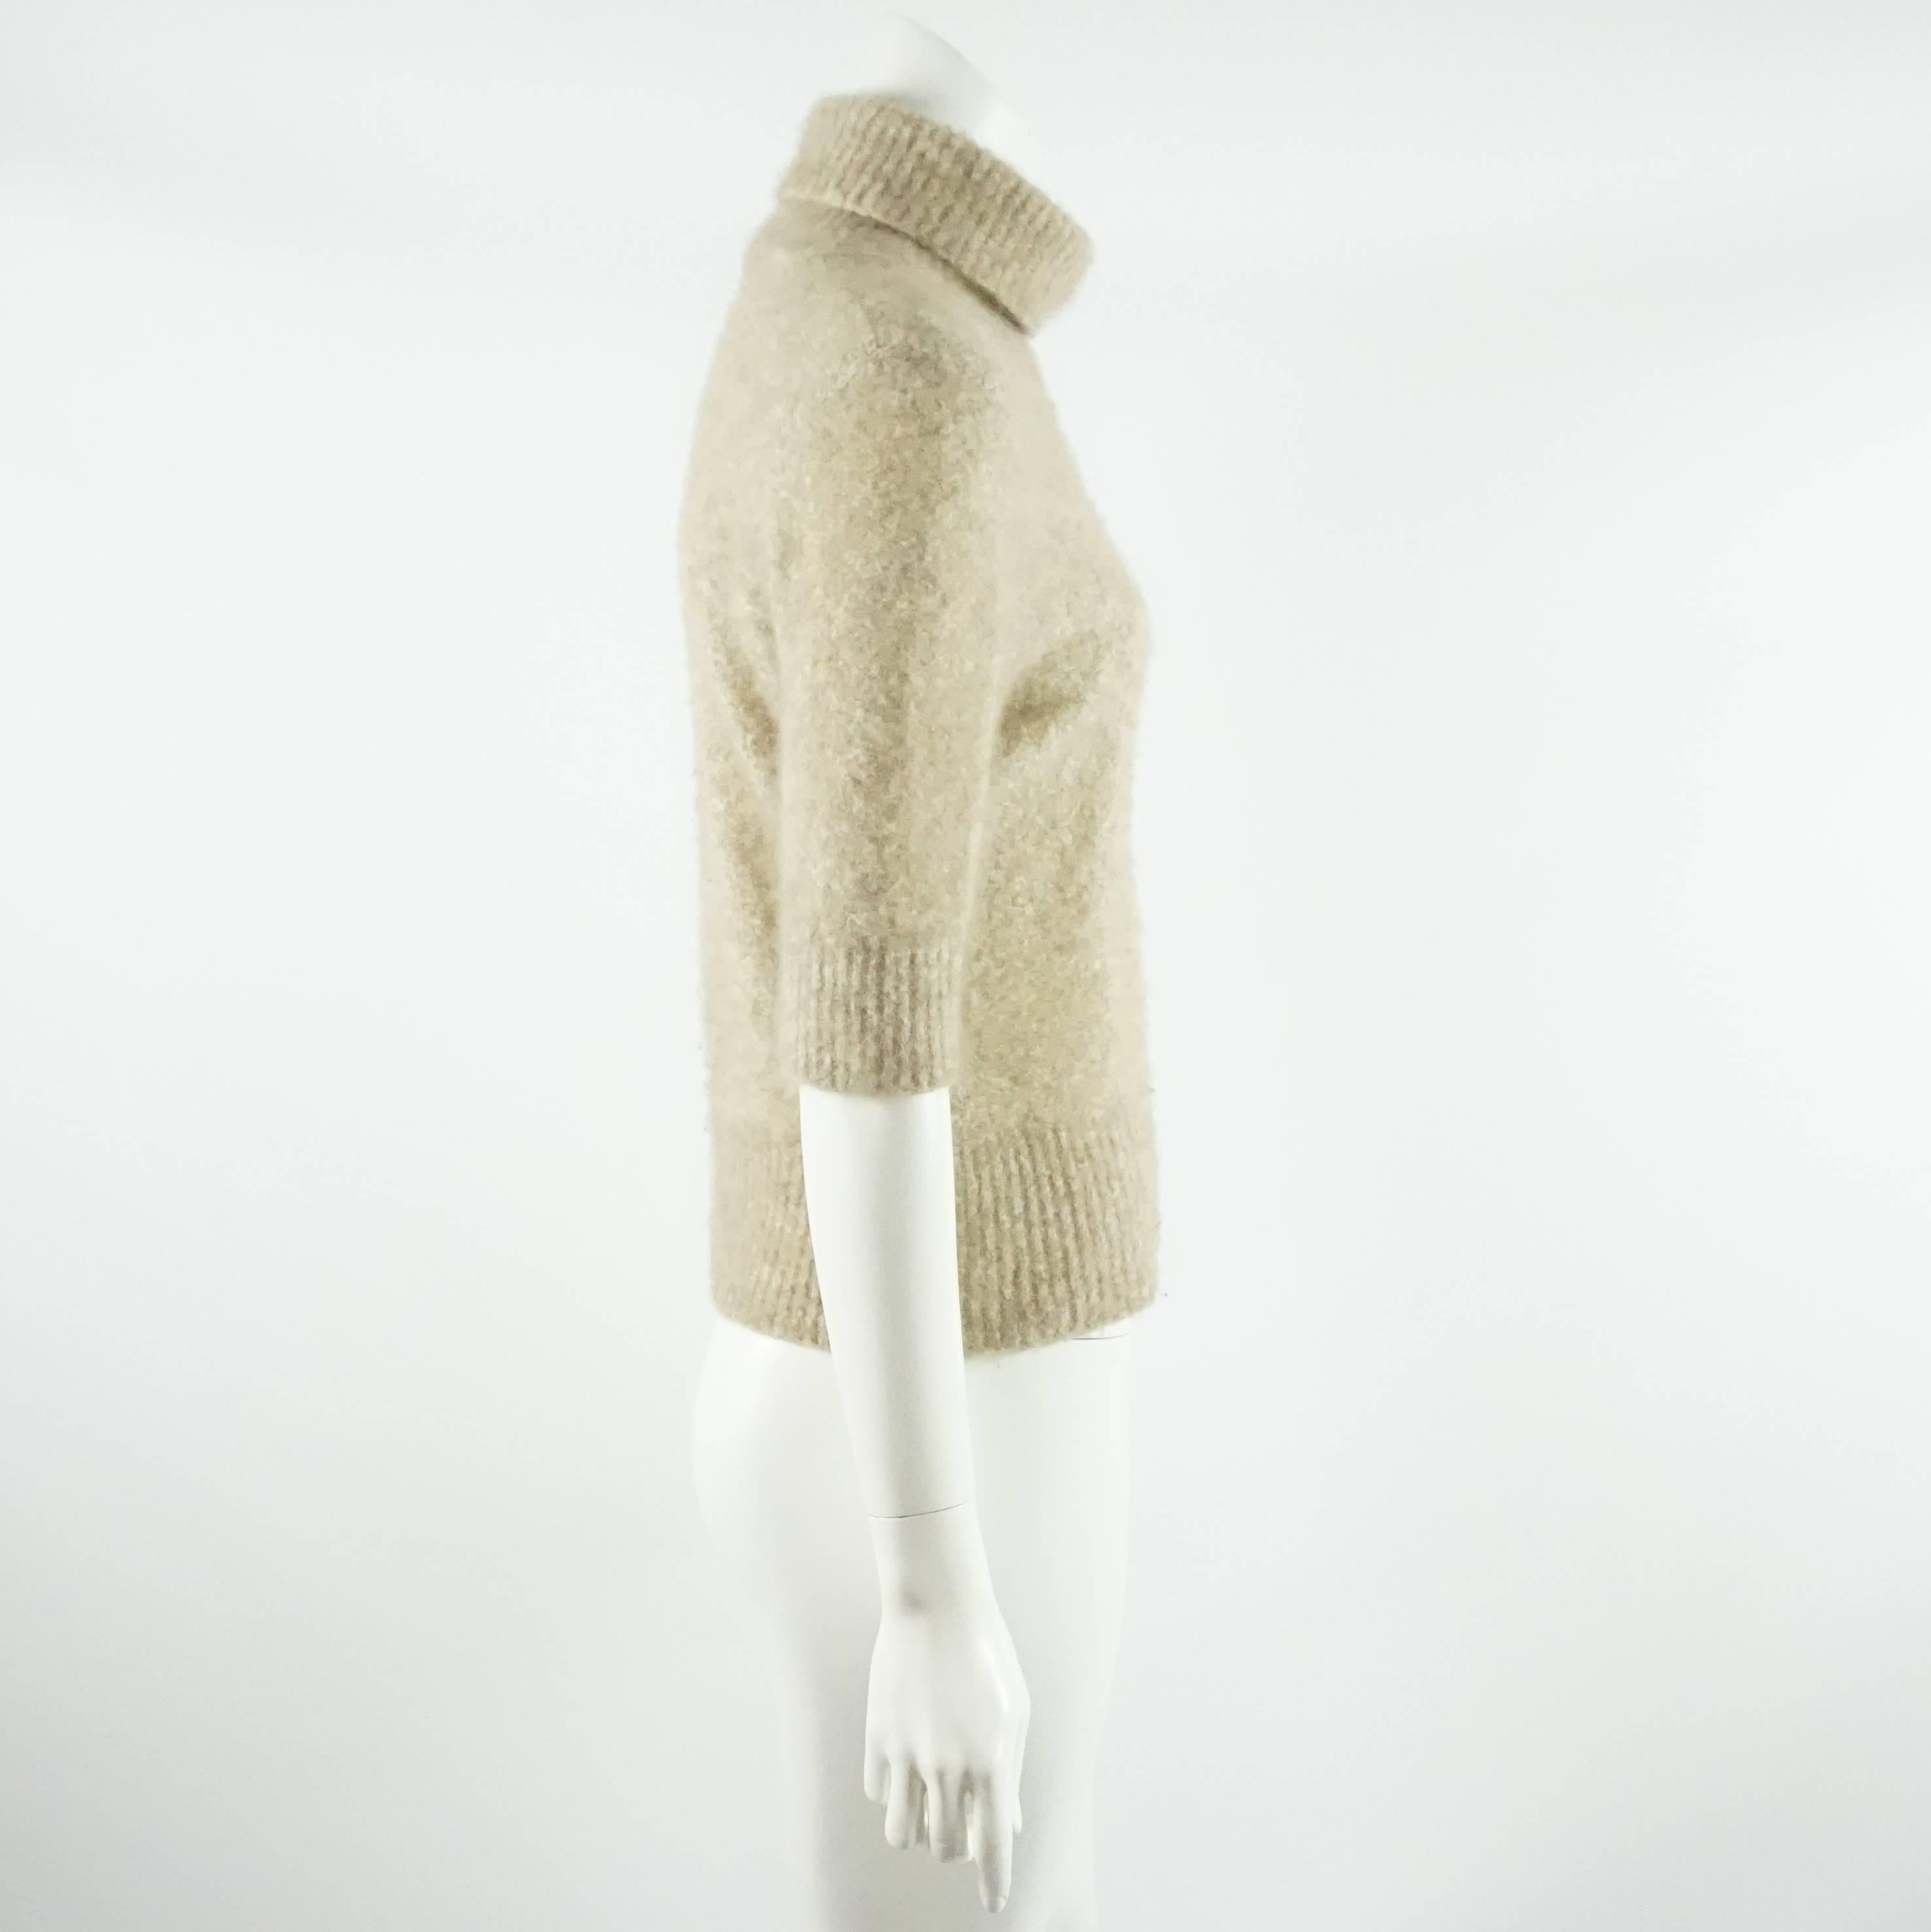 This beautiful beige Loro Piana turtleneck is a soft cashmere. The sleeves on this sweater are around elbow length. It is in good condition with some pilling.

Measurement
Bust: 36